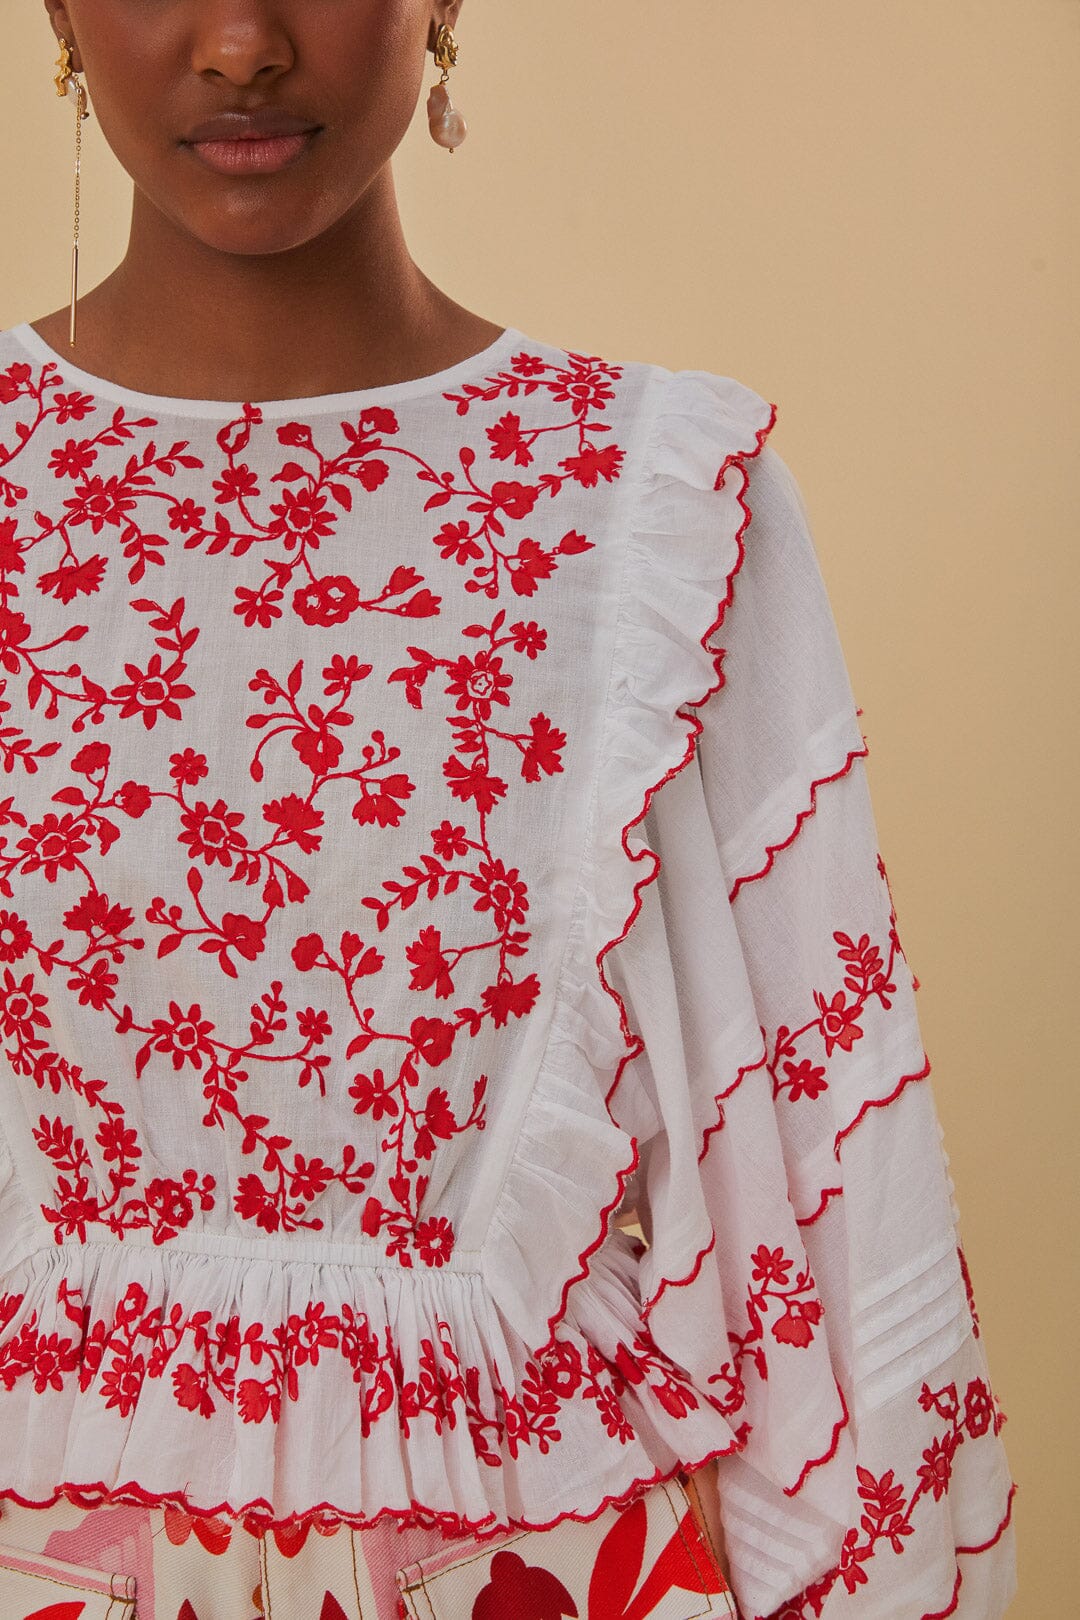 Off-White and Red Embroidered Long Sleeve Blouse